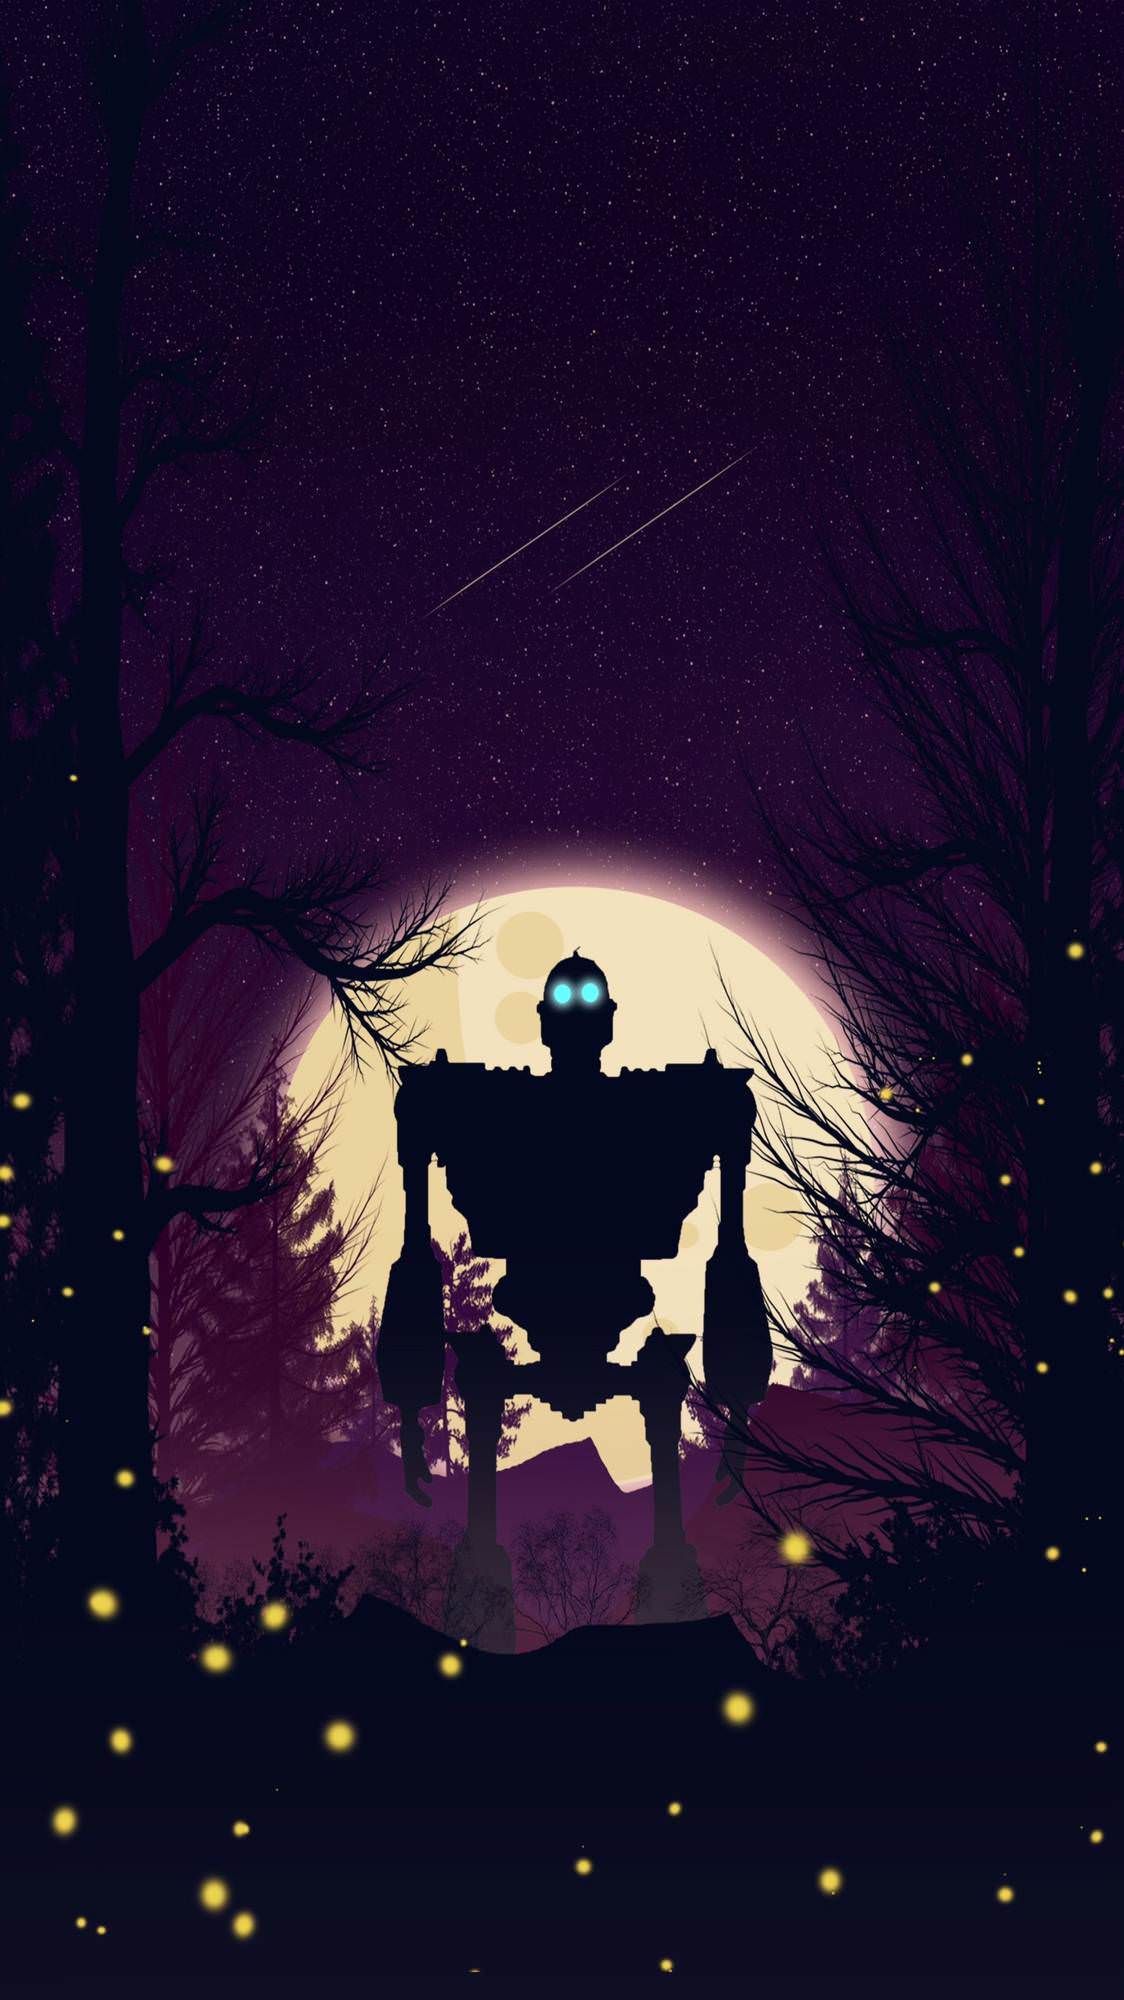 Iron Giant by Aartliner. Cool evil wallpaper, The iron giant